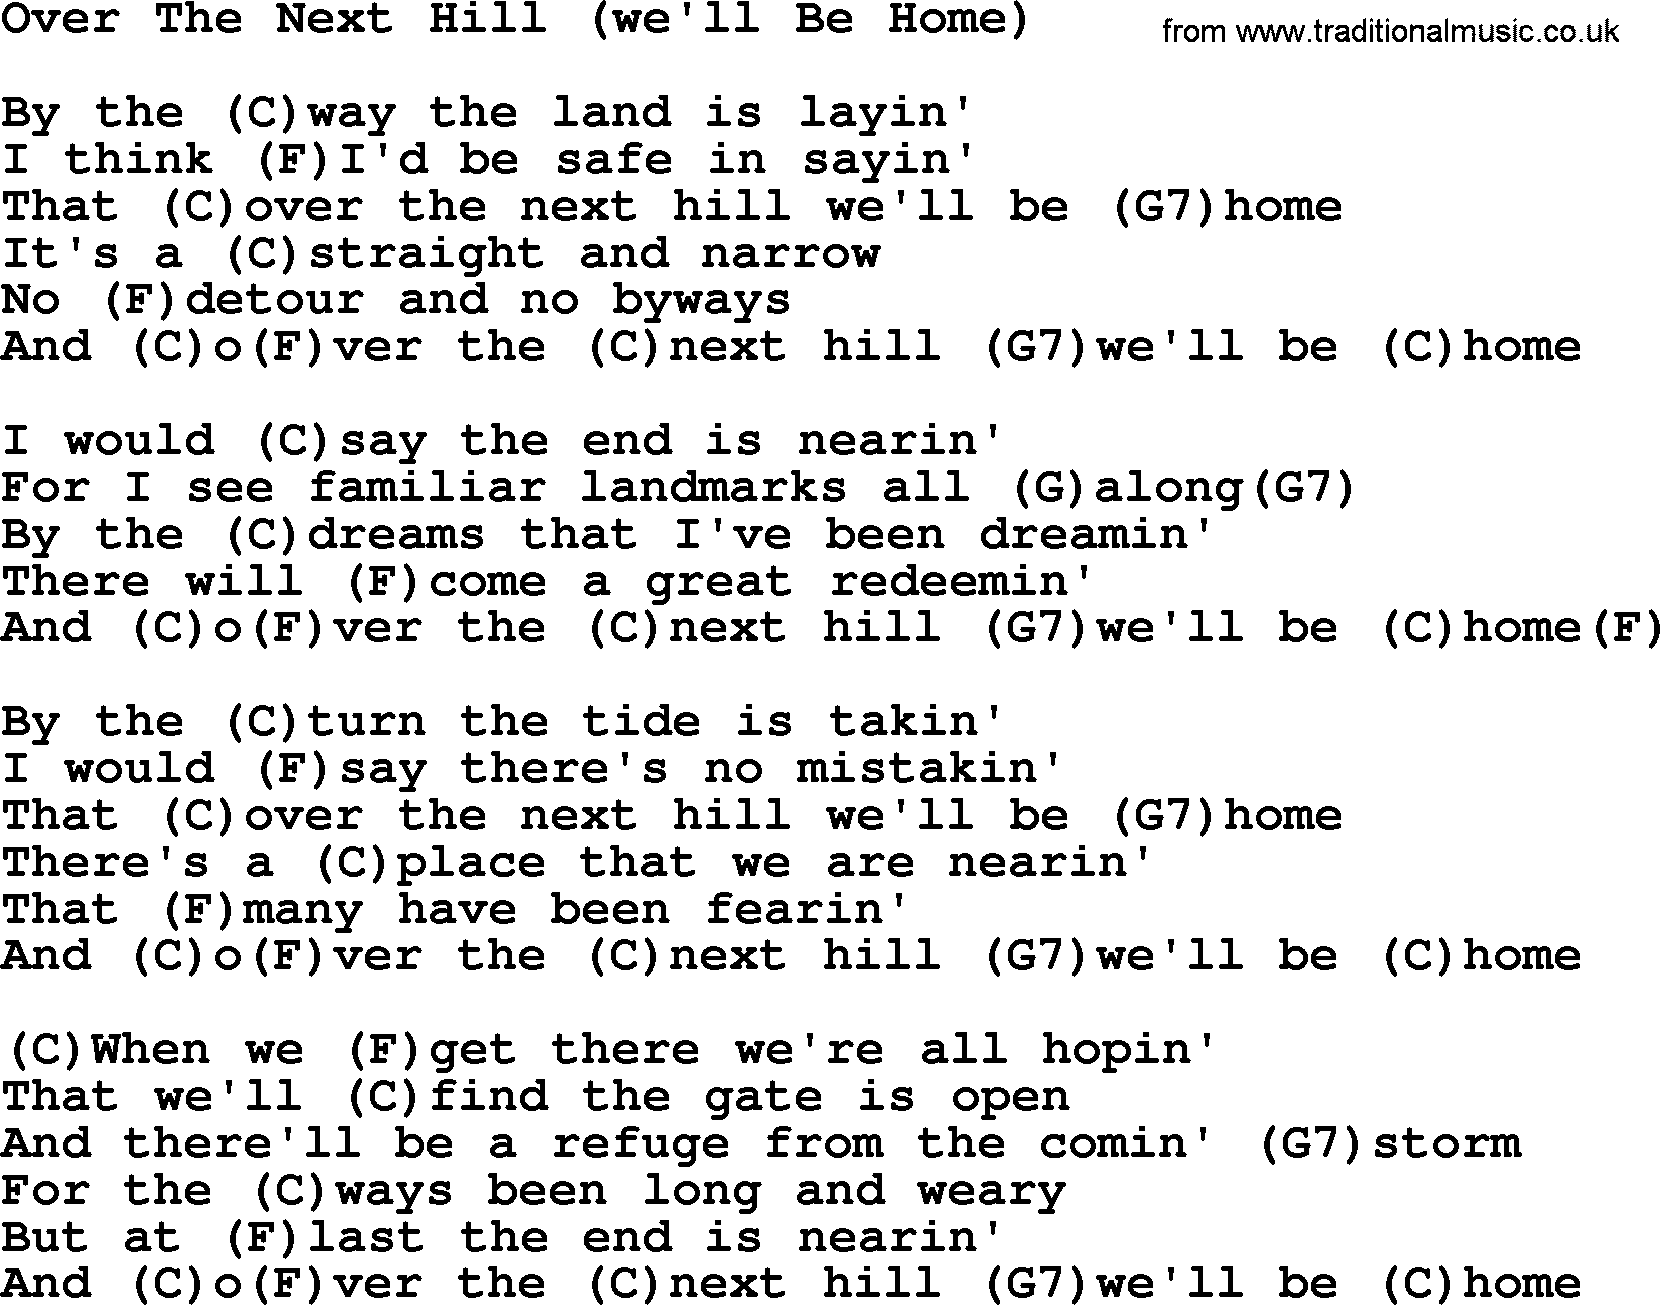 Johnny Cash song Over The Next Hill(We'll Be Home), lyrics and chords